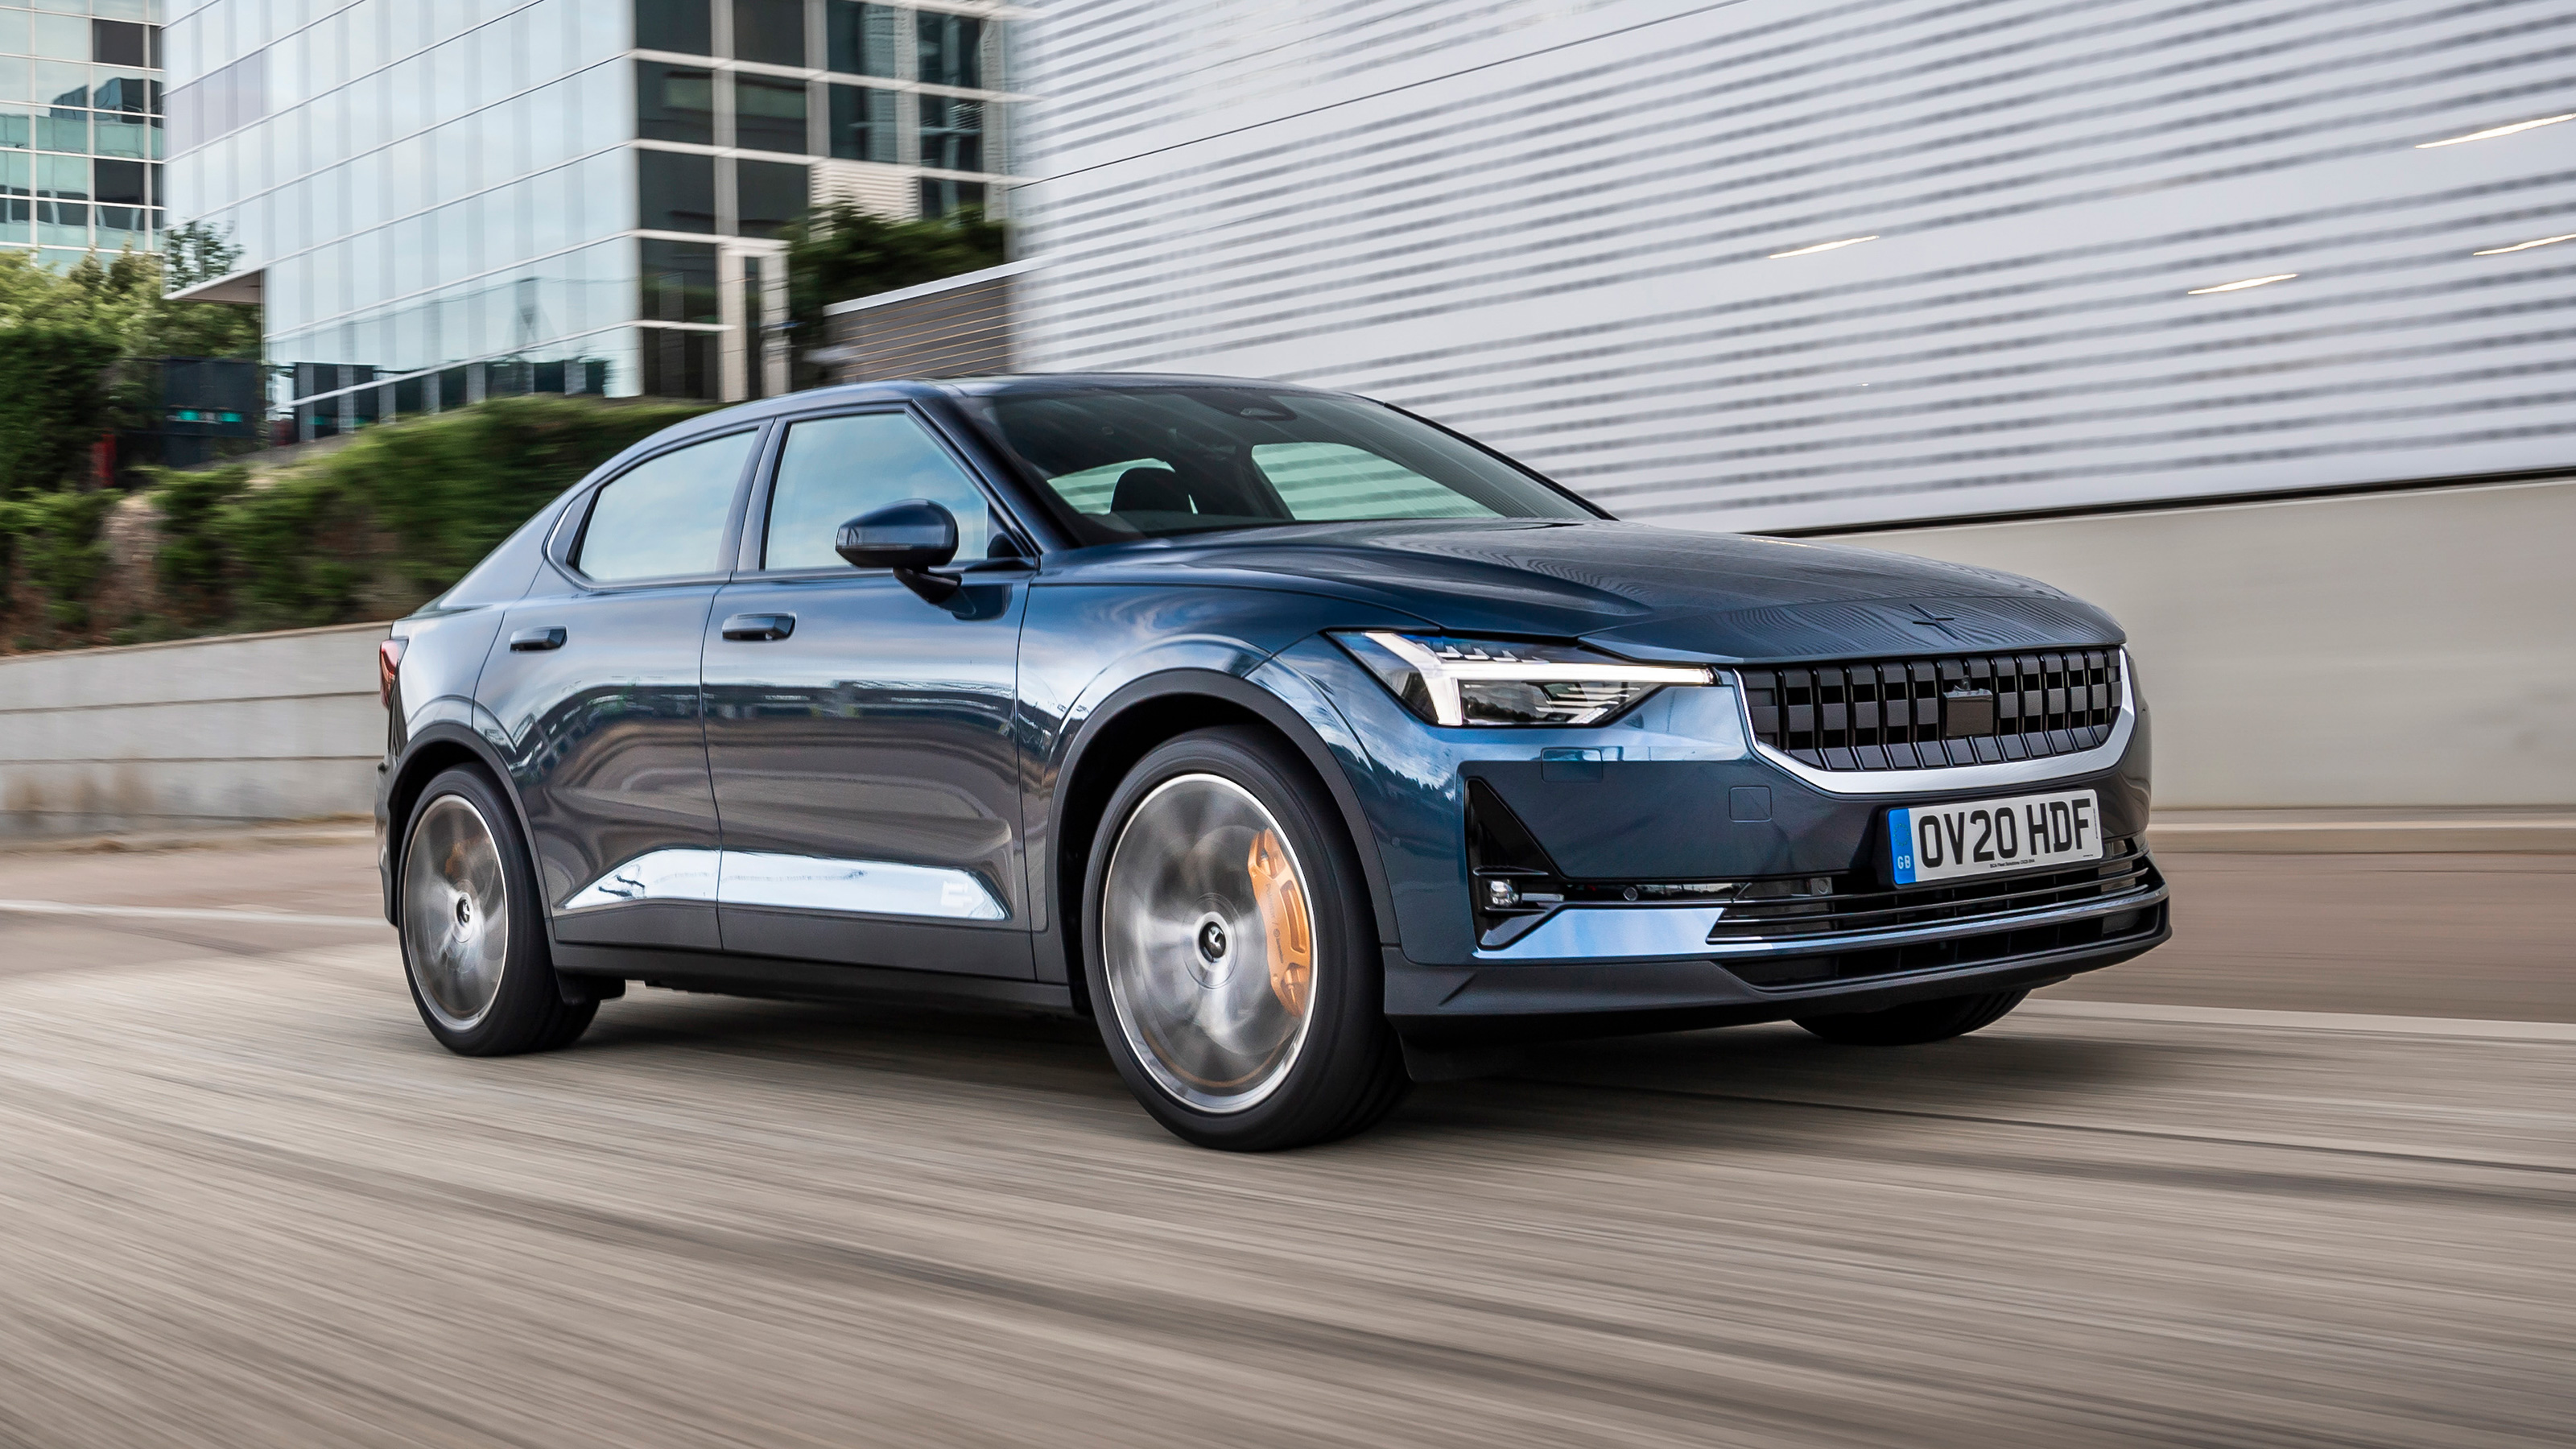 Polestar 2 Polestar 2 Launch Edition Priced From £49,000 In The UK Carscoops / Learn more